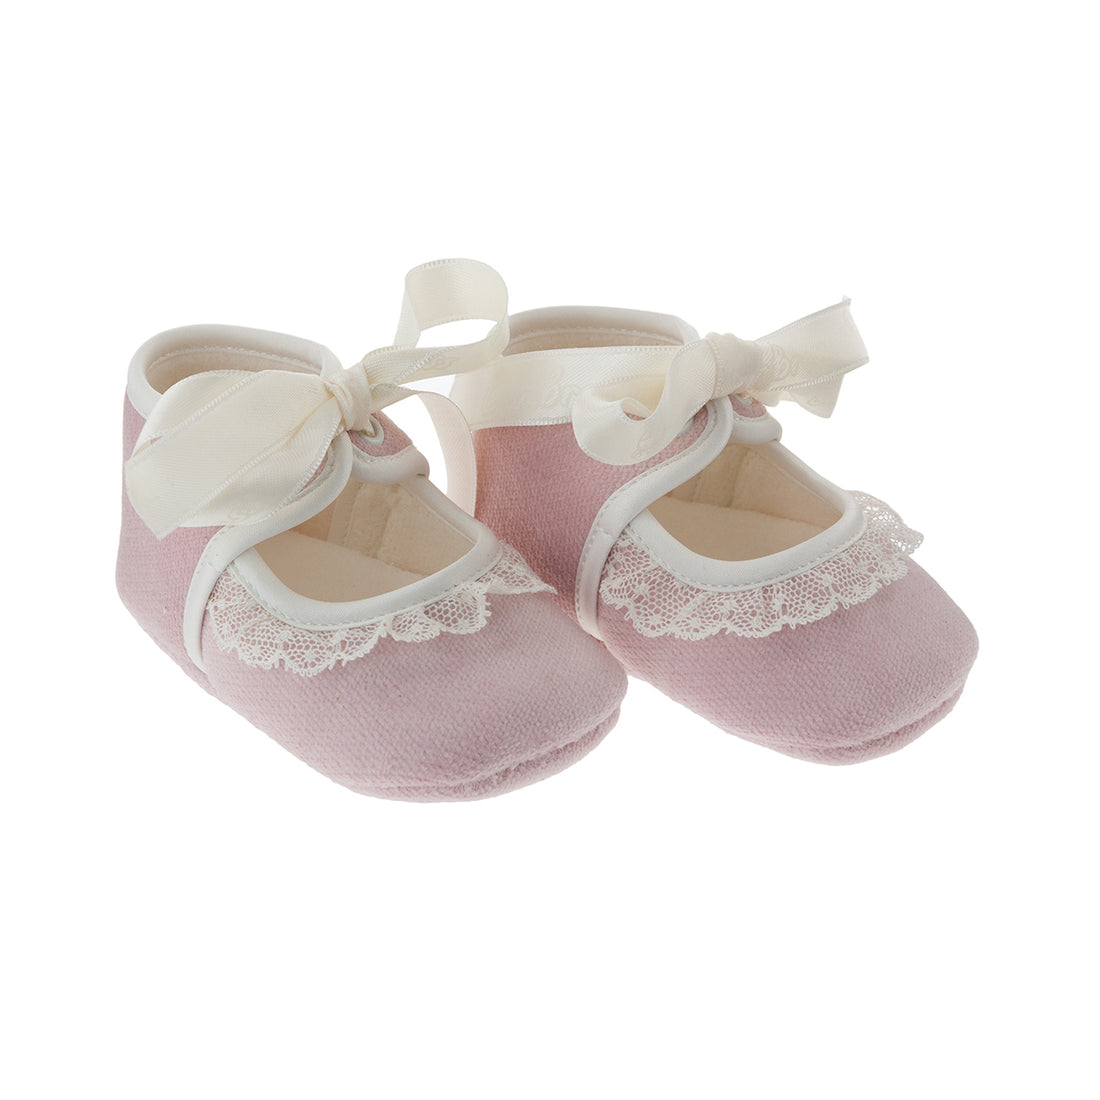 r&j-cambrass-sa-winter-baby-shoes-mod-597-947-pink- (2)